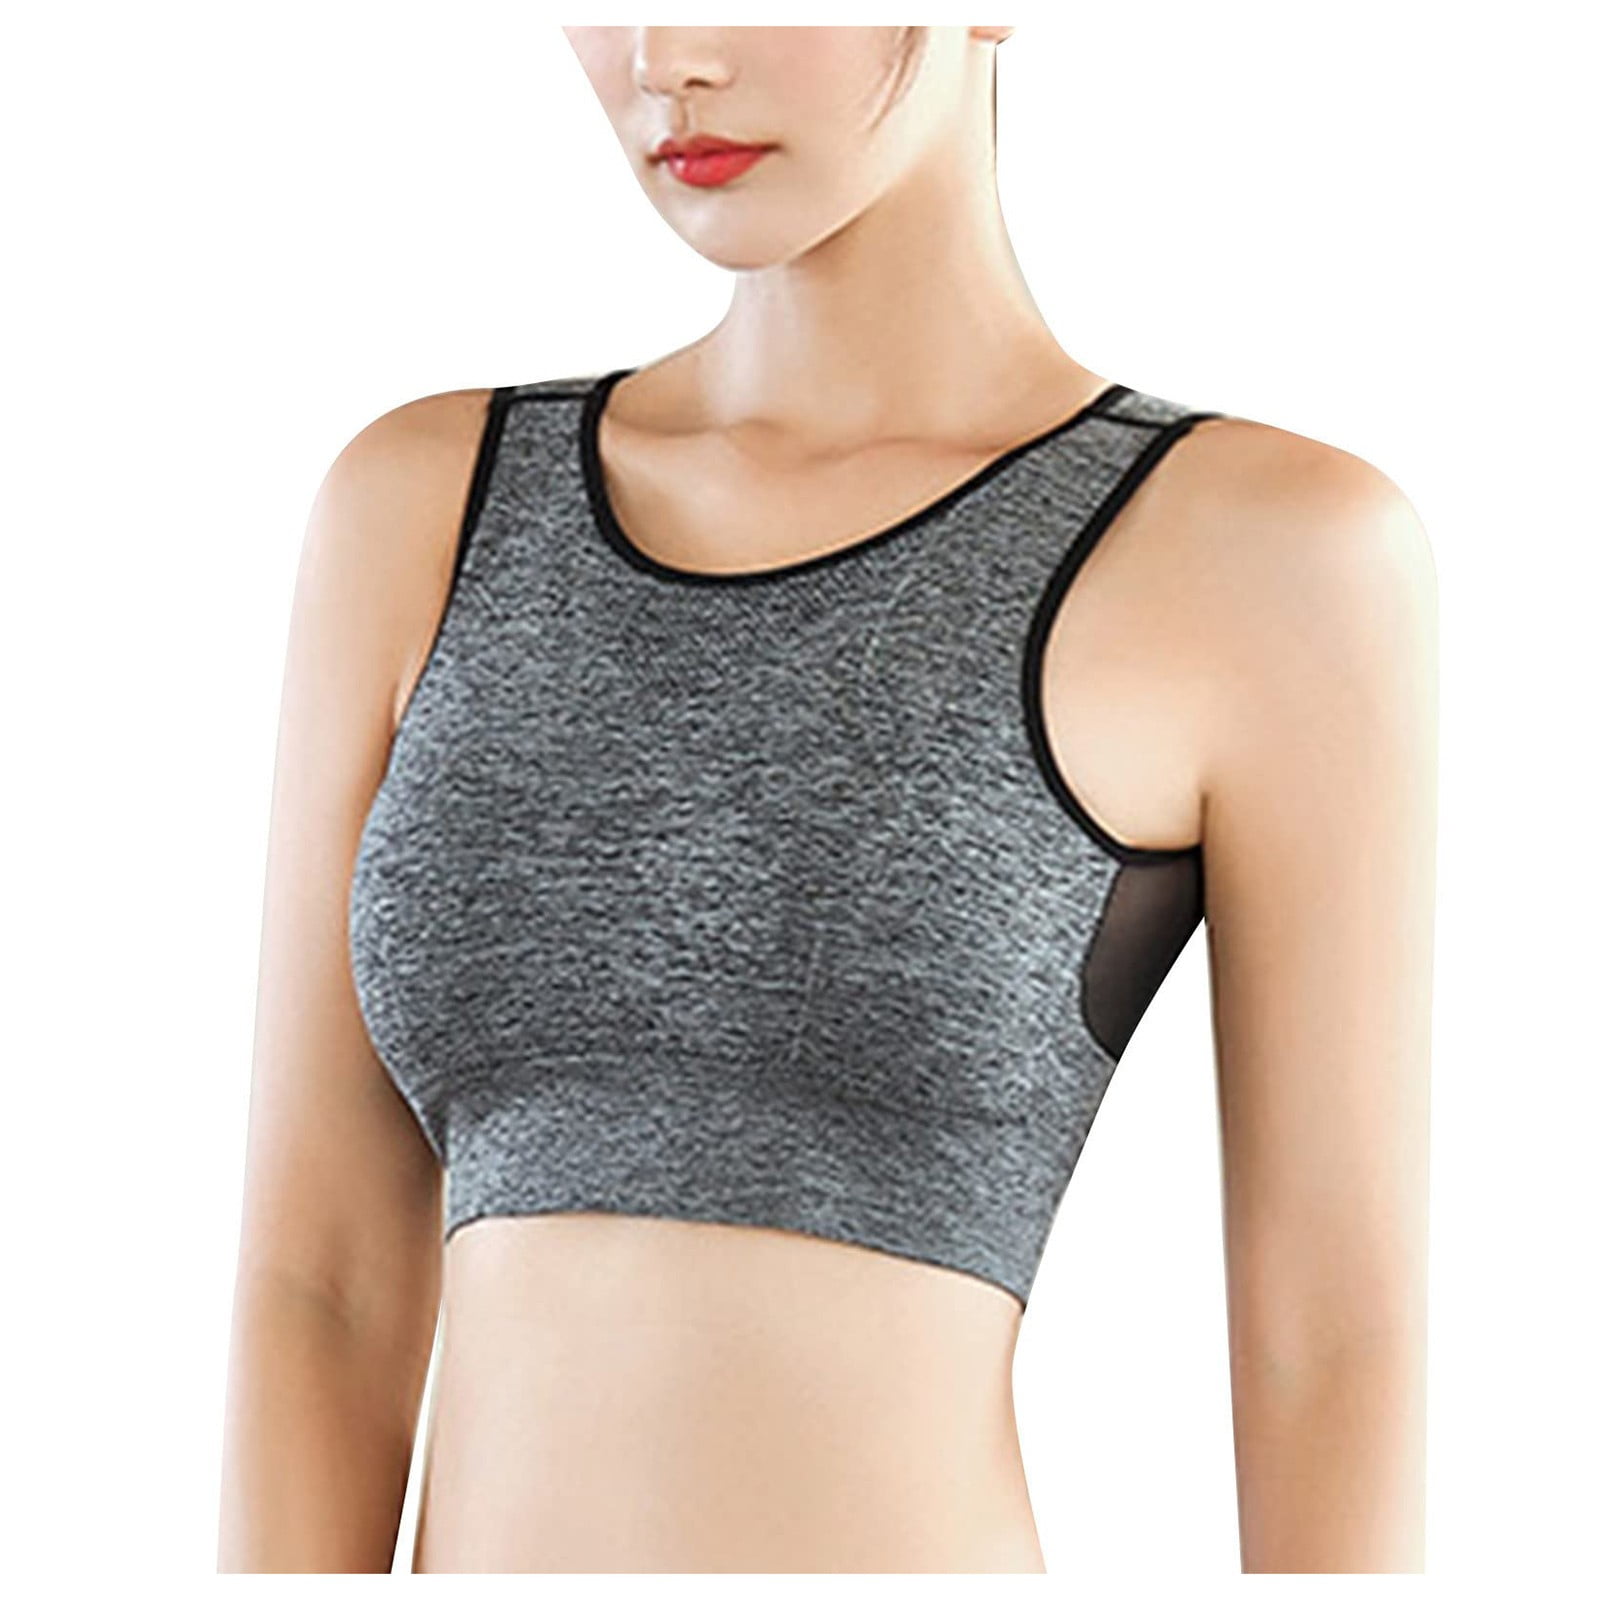 Knosfe Women's Sports Bras High Impact Racerback Mesh Wireless Bras with  Support and Lift Plus Size Bras Full Coverage T-Shirt Bra No Underwire  Light